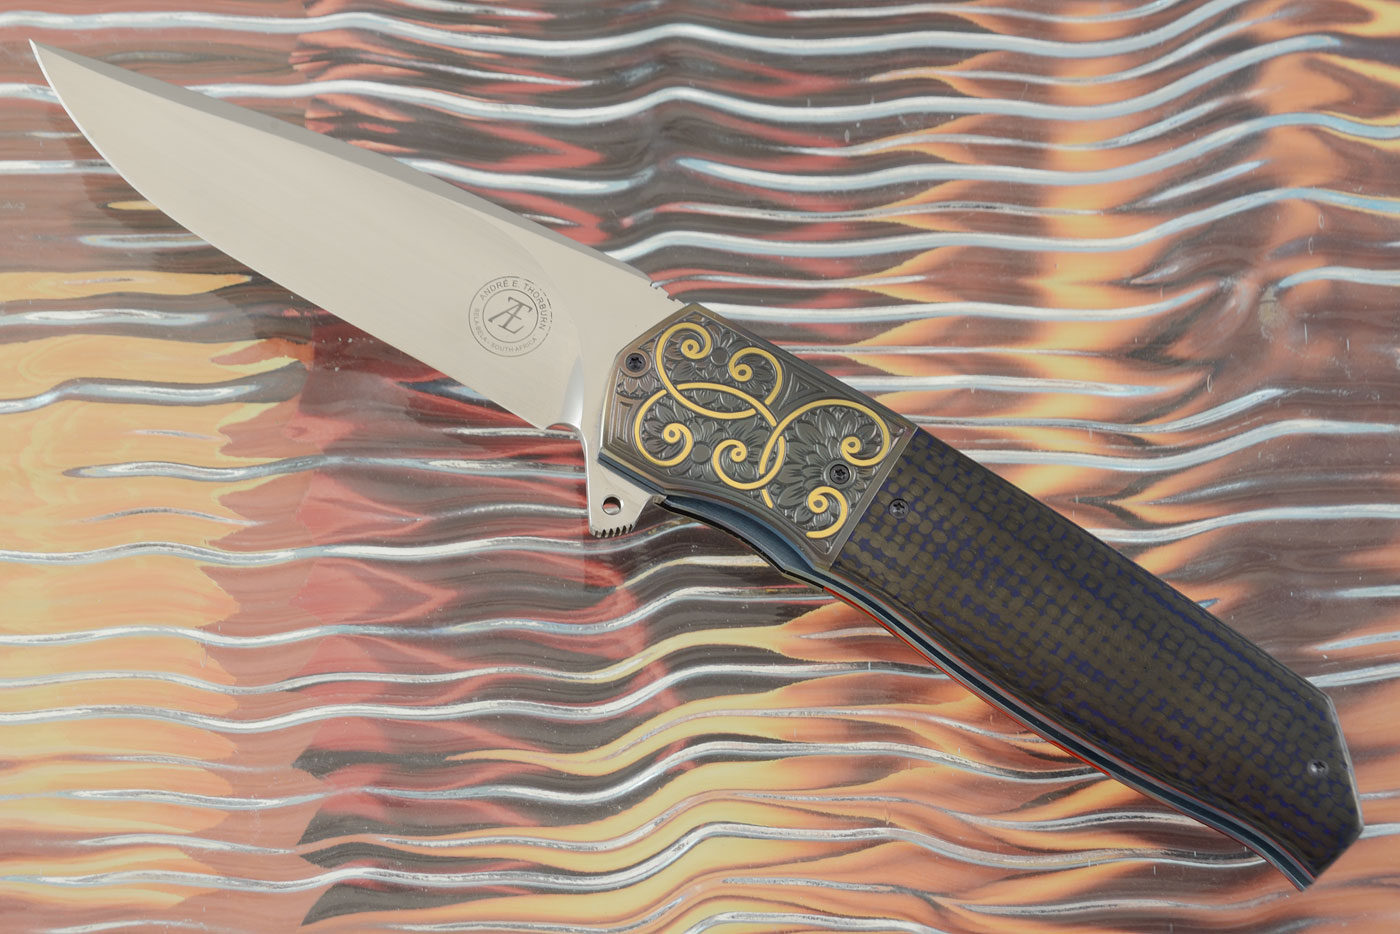 L36S with Carbon Fiber and Engraved Zirconium with Gold Inlay (Ceramic IKBS)